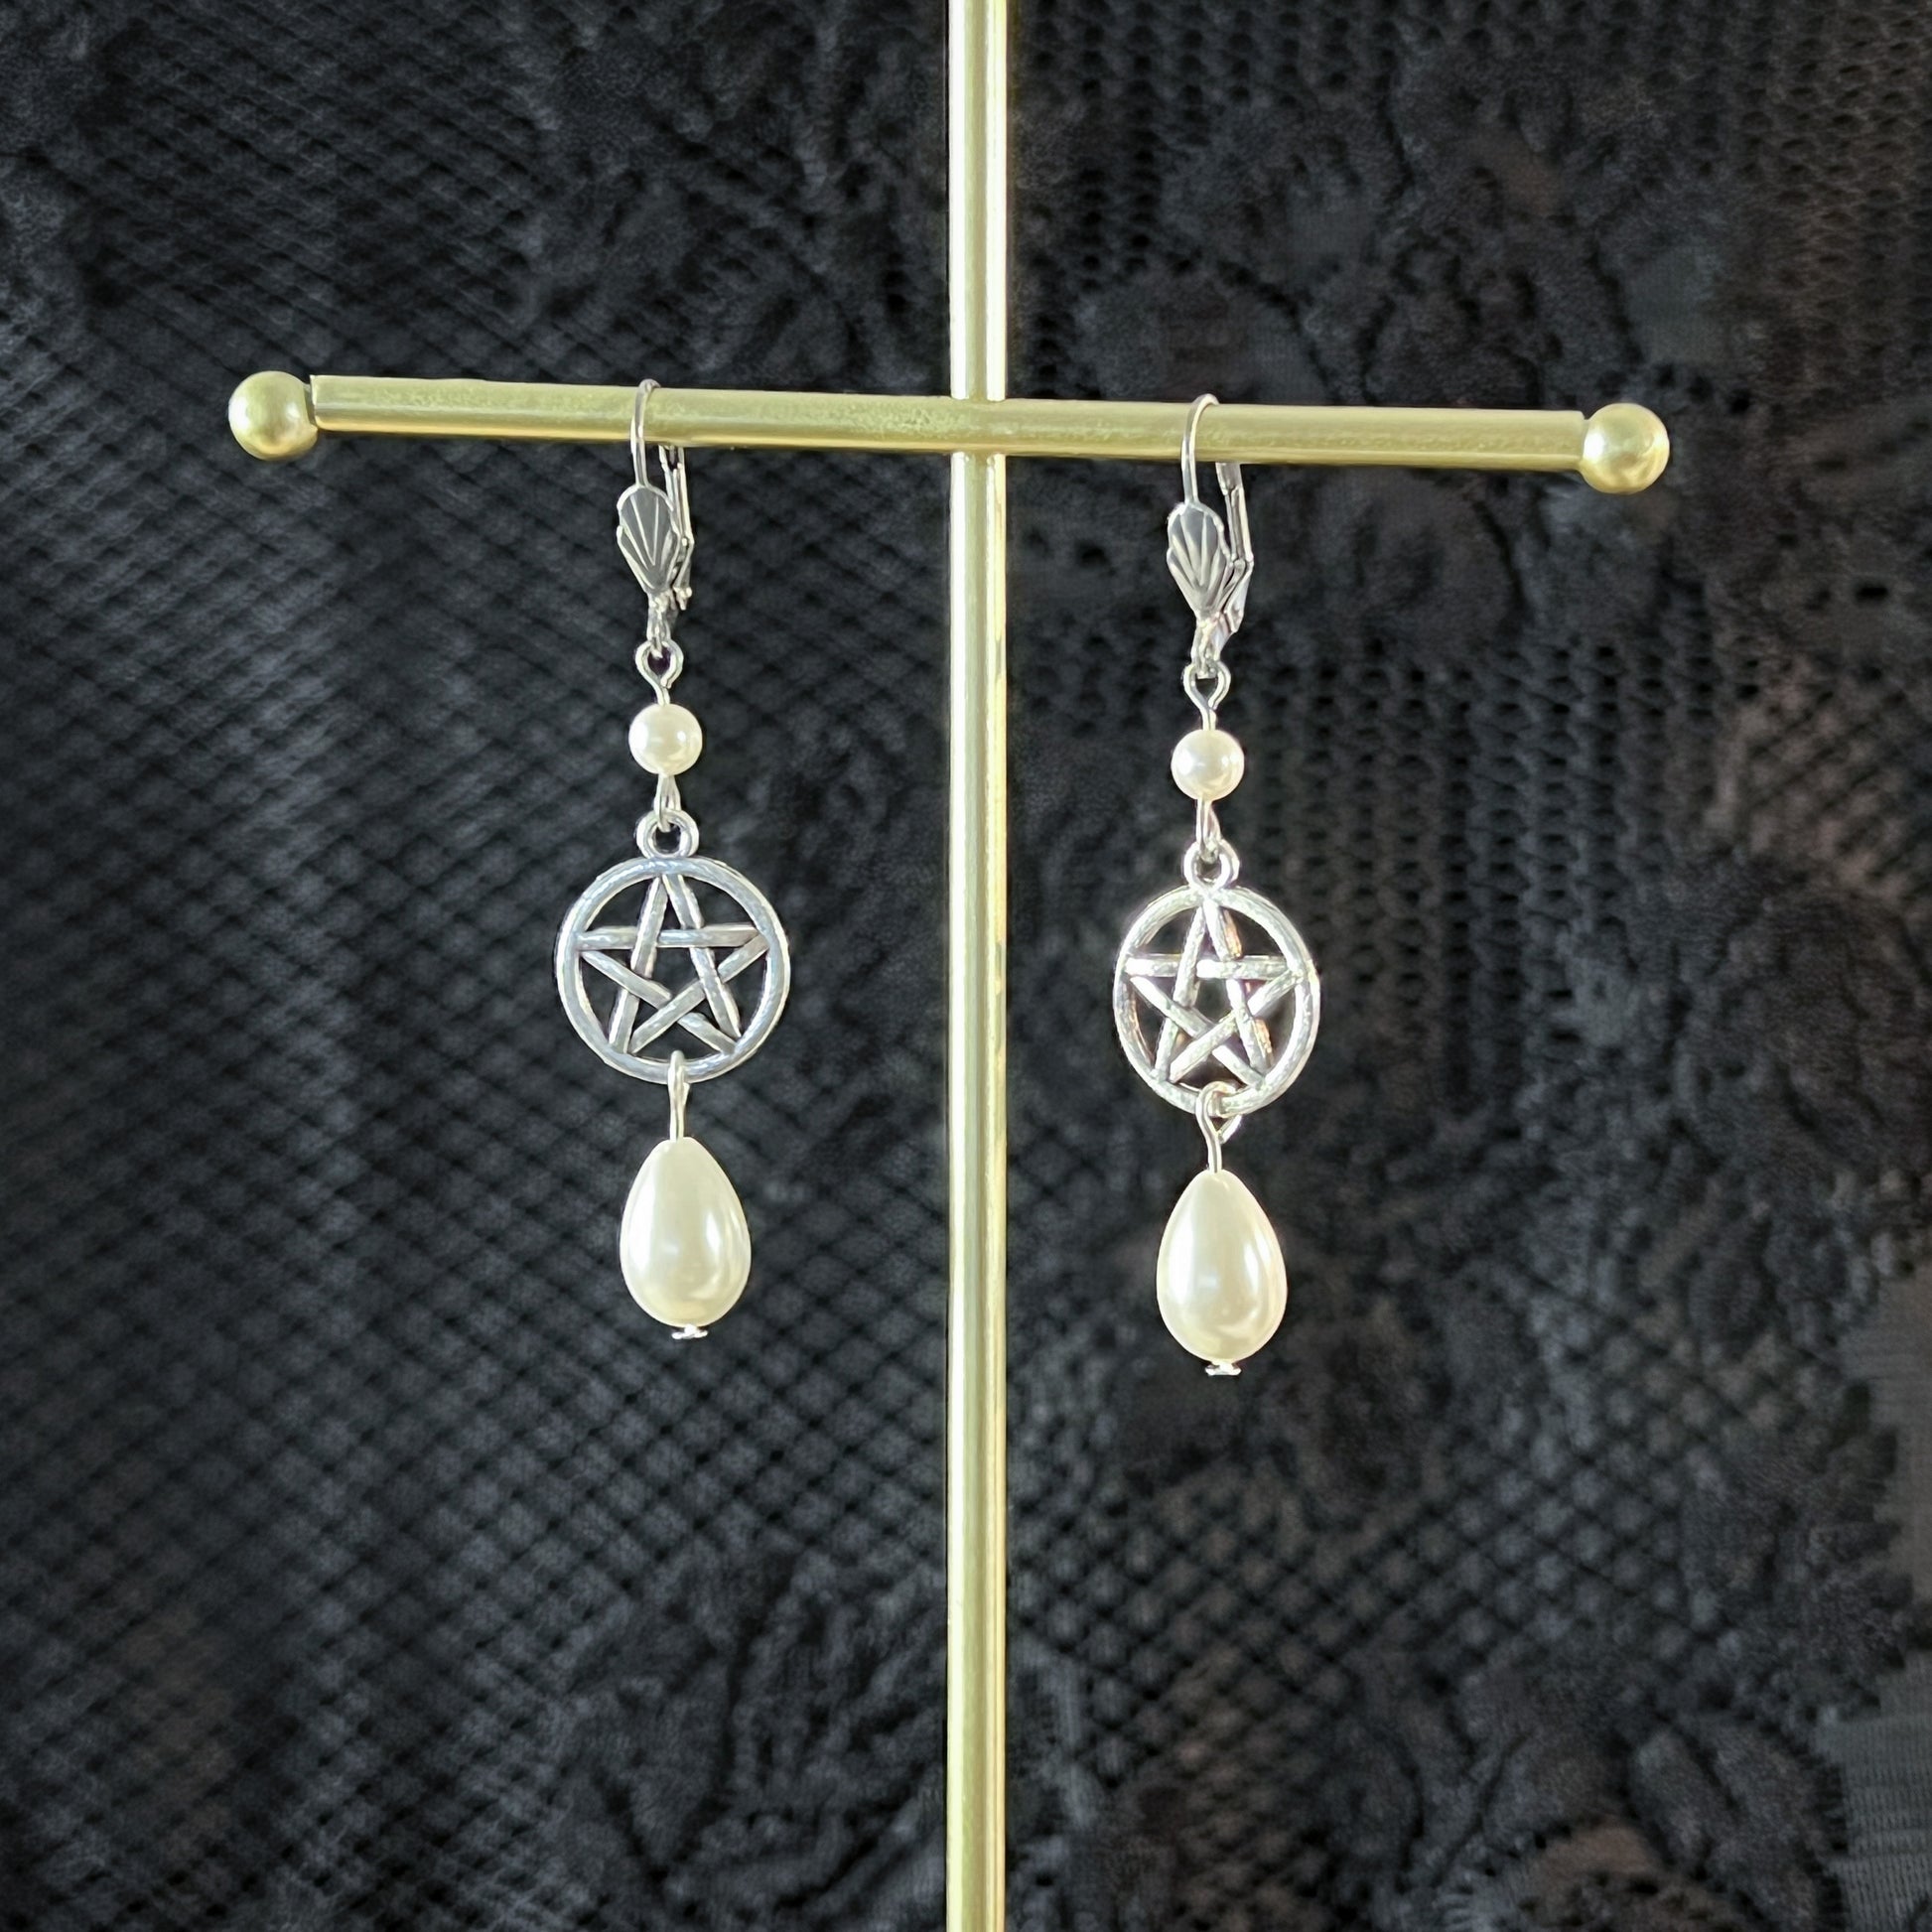 Pentacle and pearls victorian earrings witchy jewelry dangle & drop Earrings bridal earrings wedding jewelry